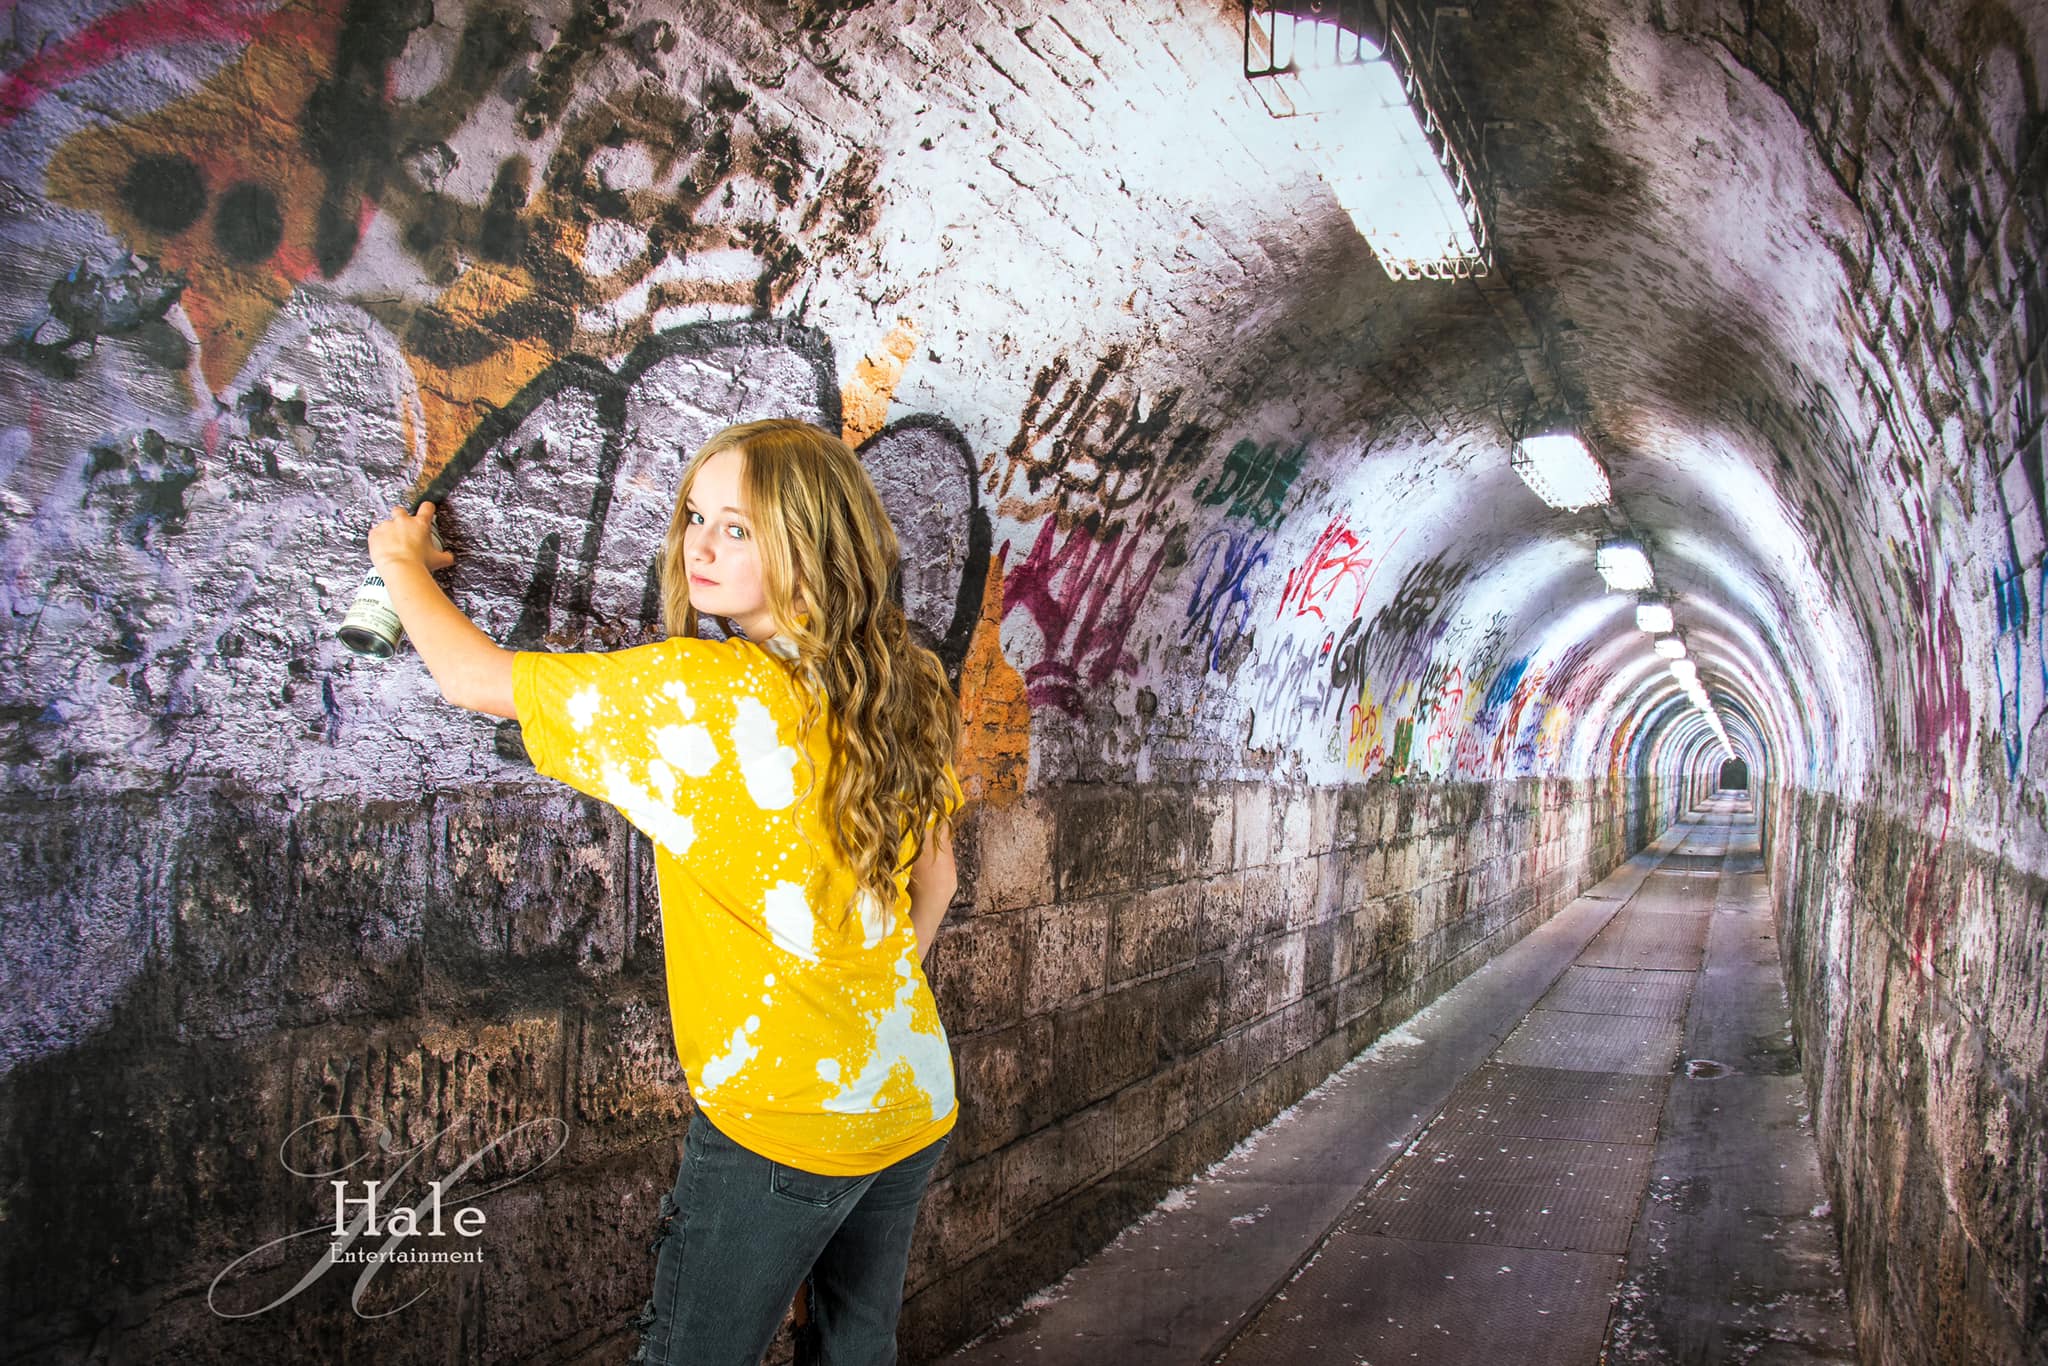 Kate Graffiti Wall Backdrop Tunnel Light Background for Photography